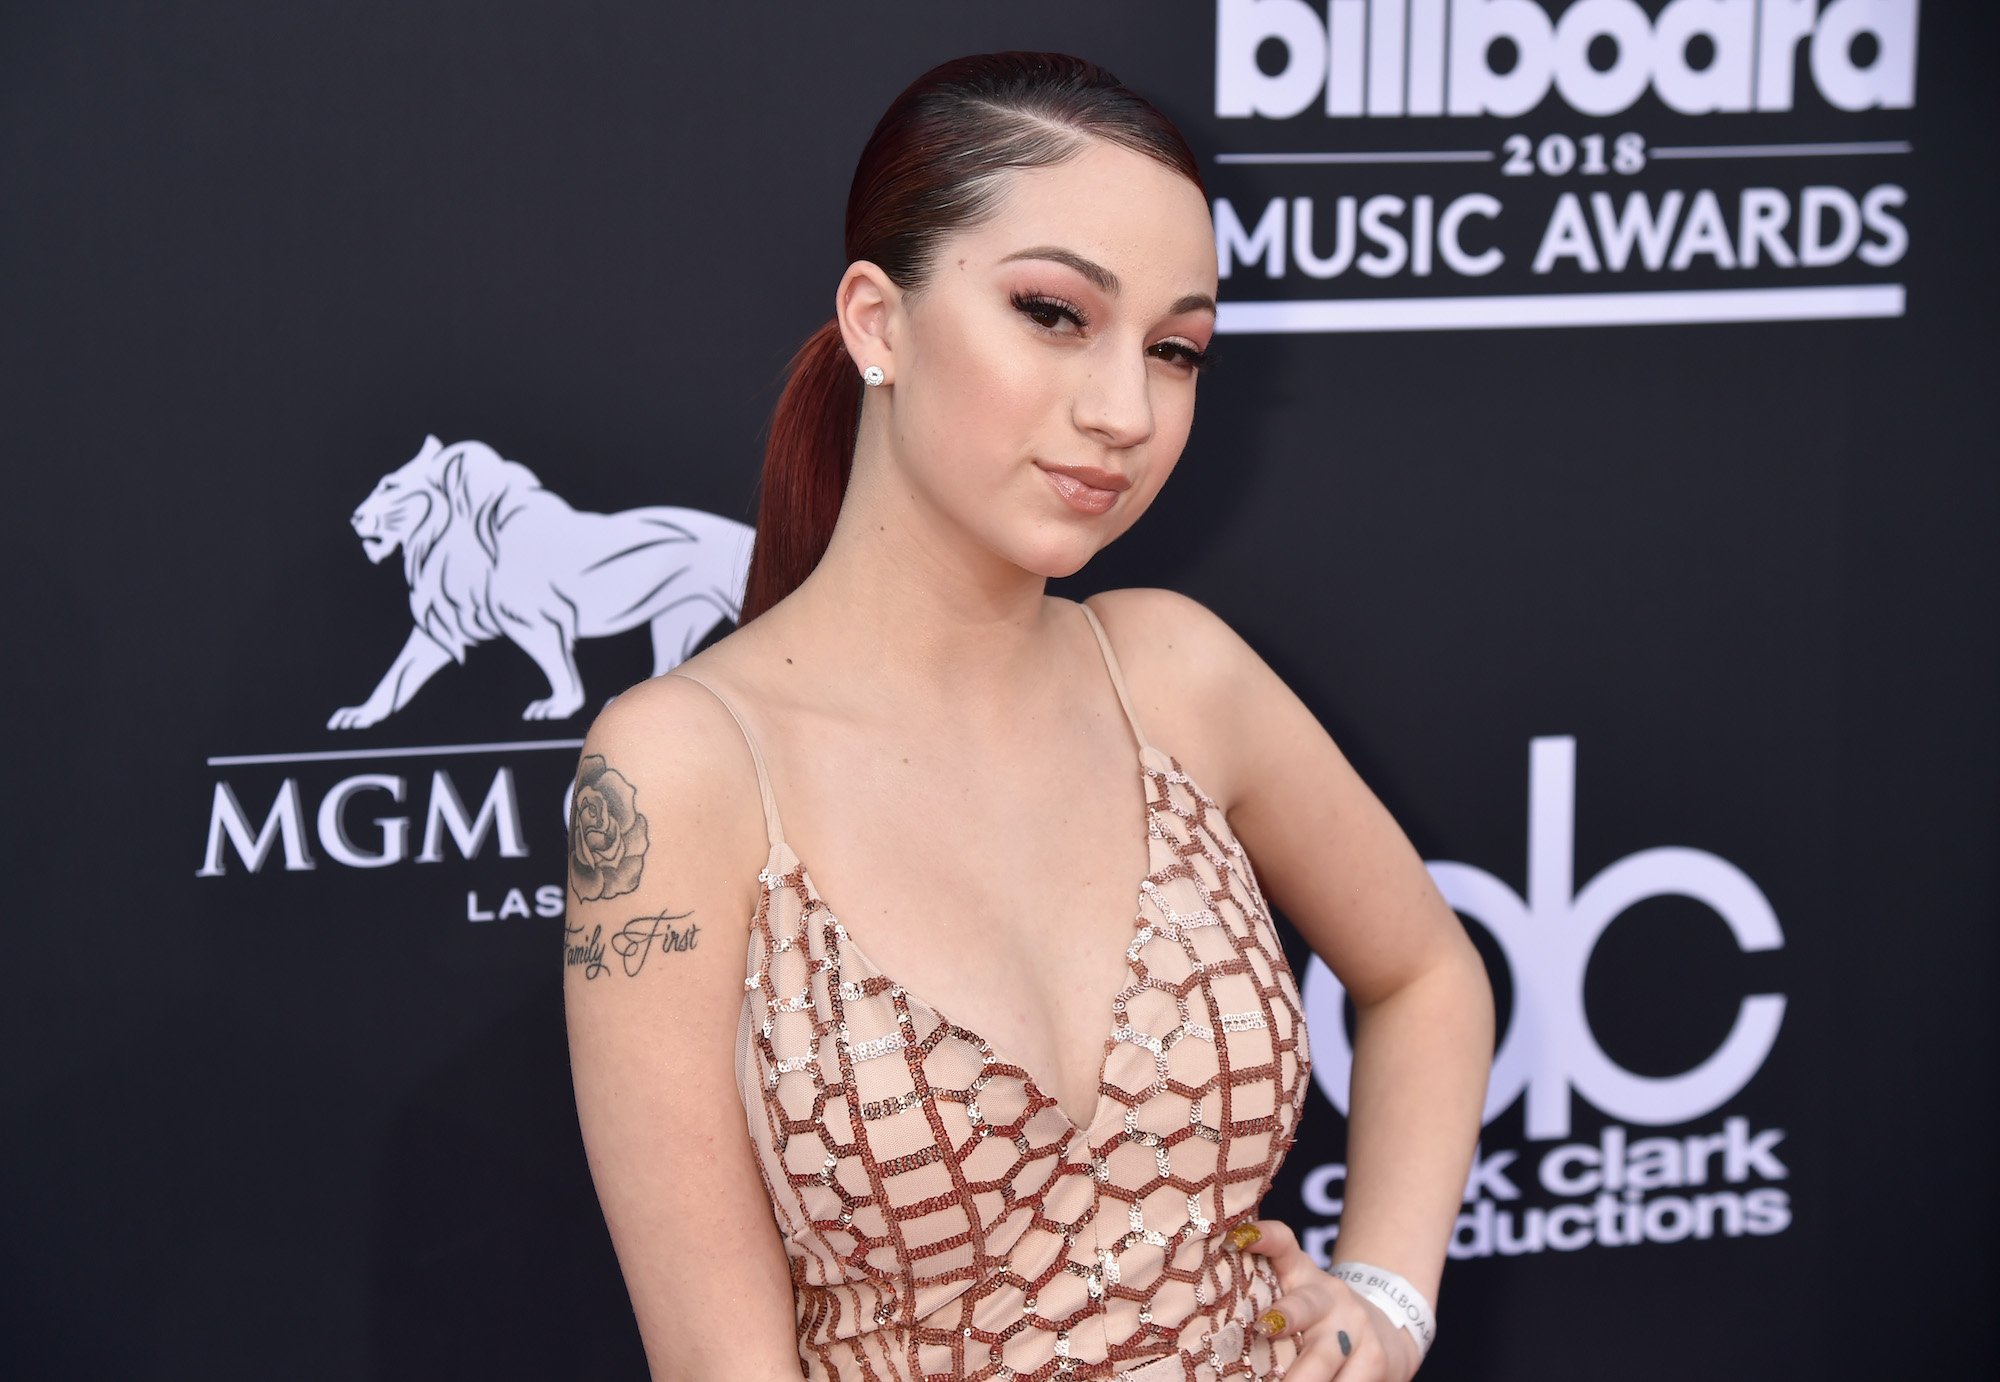 Bhad Bhabie smiling in front of a black background